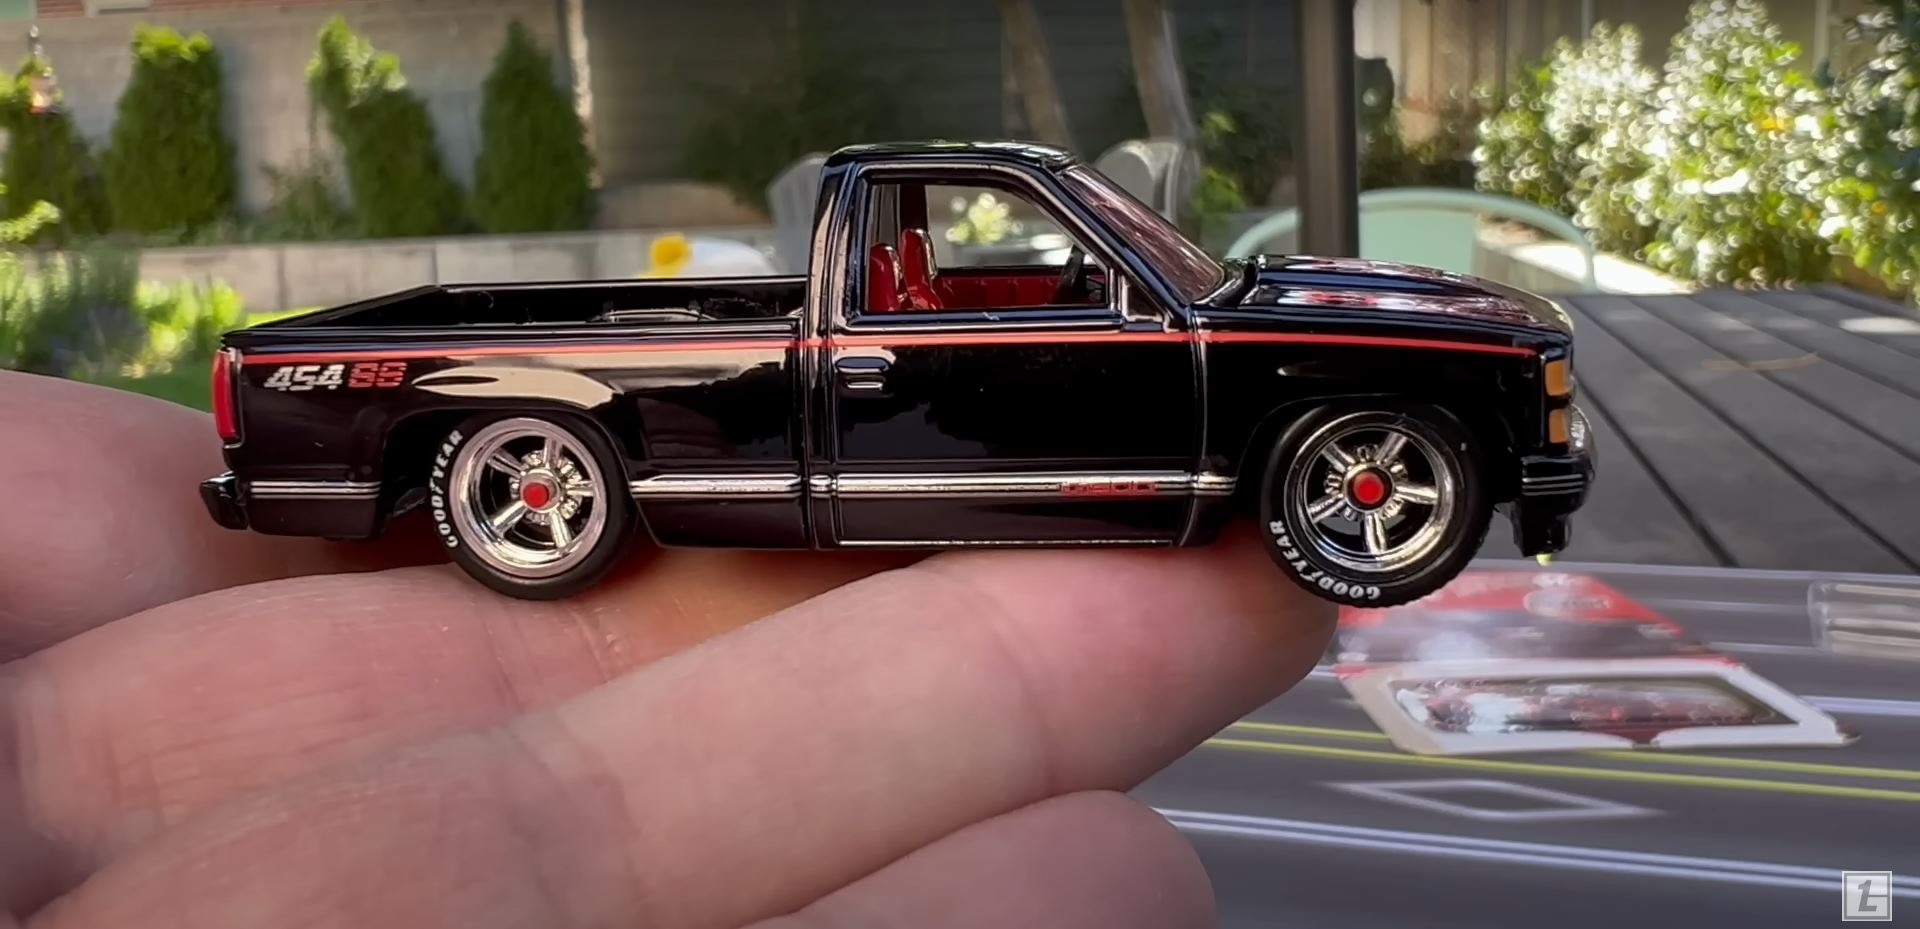 Hot Wheels RLC Exclusive Chevy 454 SS Was an Instant Hit, All Sold Out